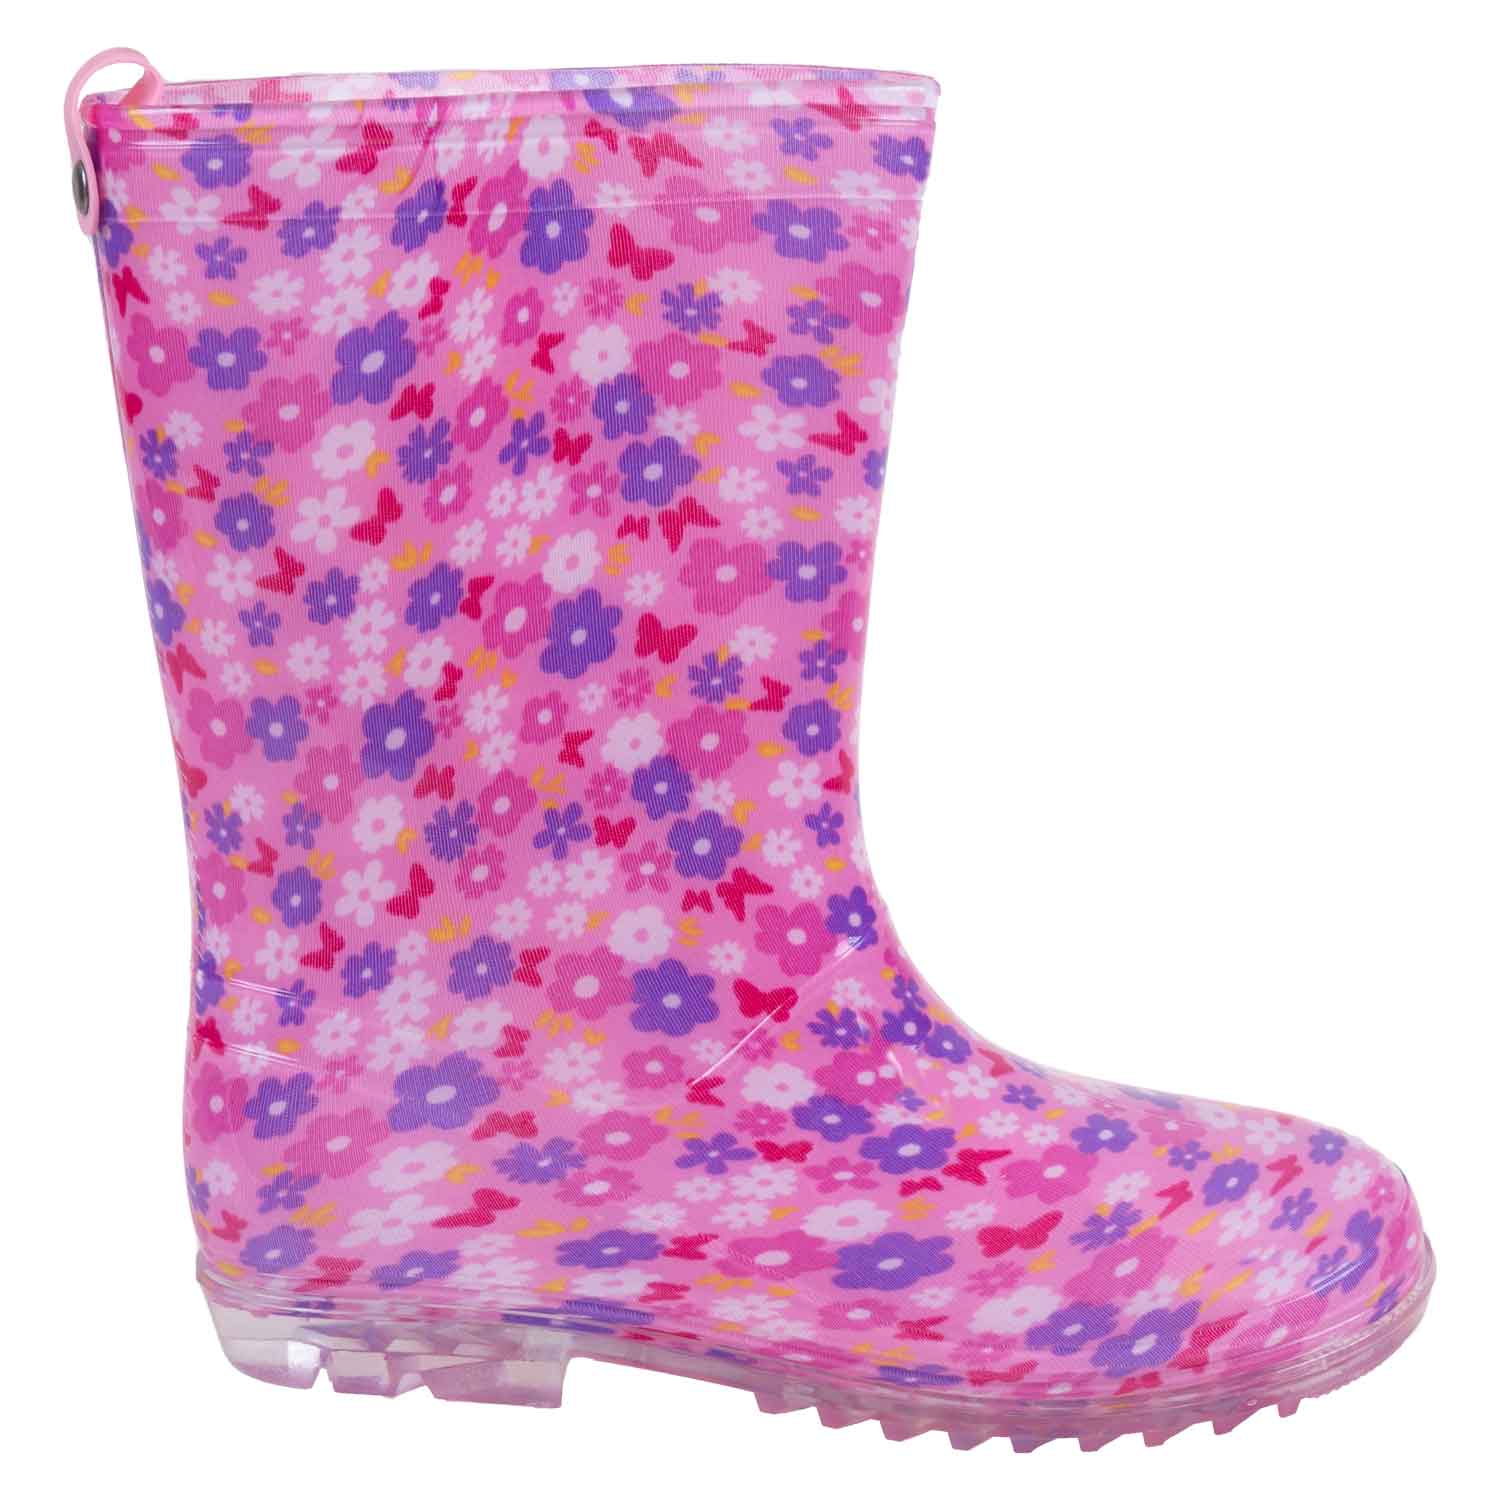 Rubber rain boots - Ditsy daisies, size 11